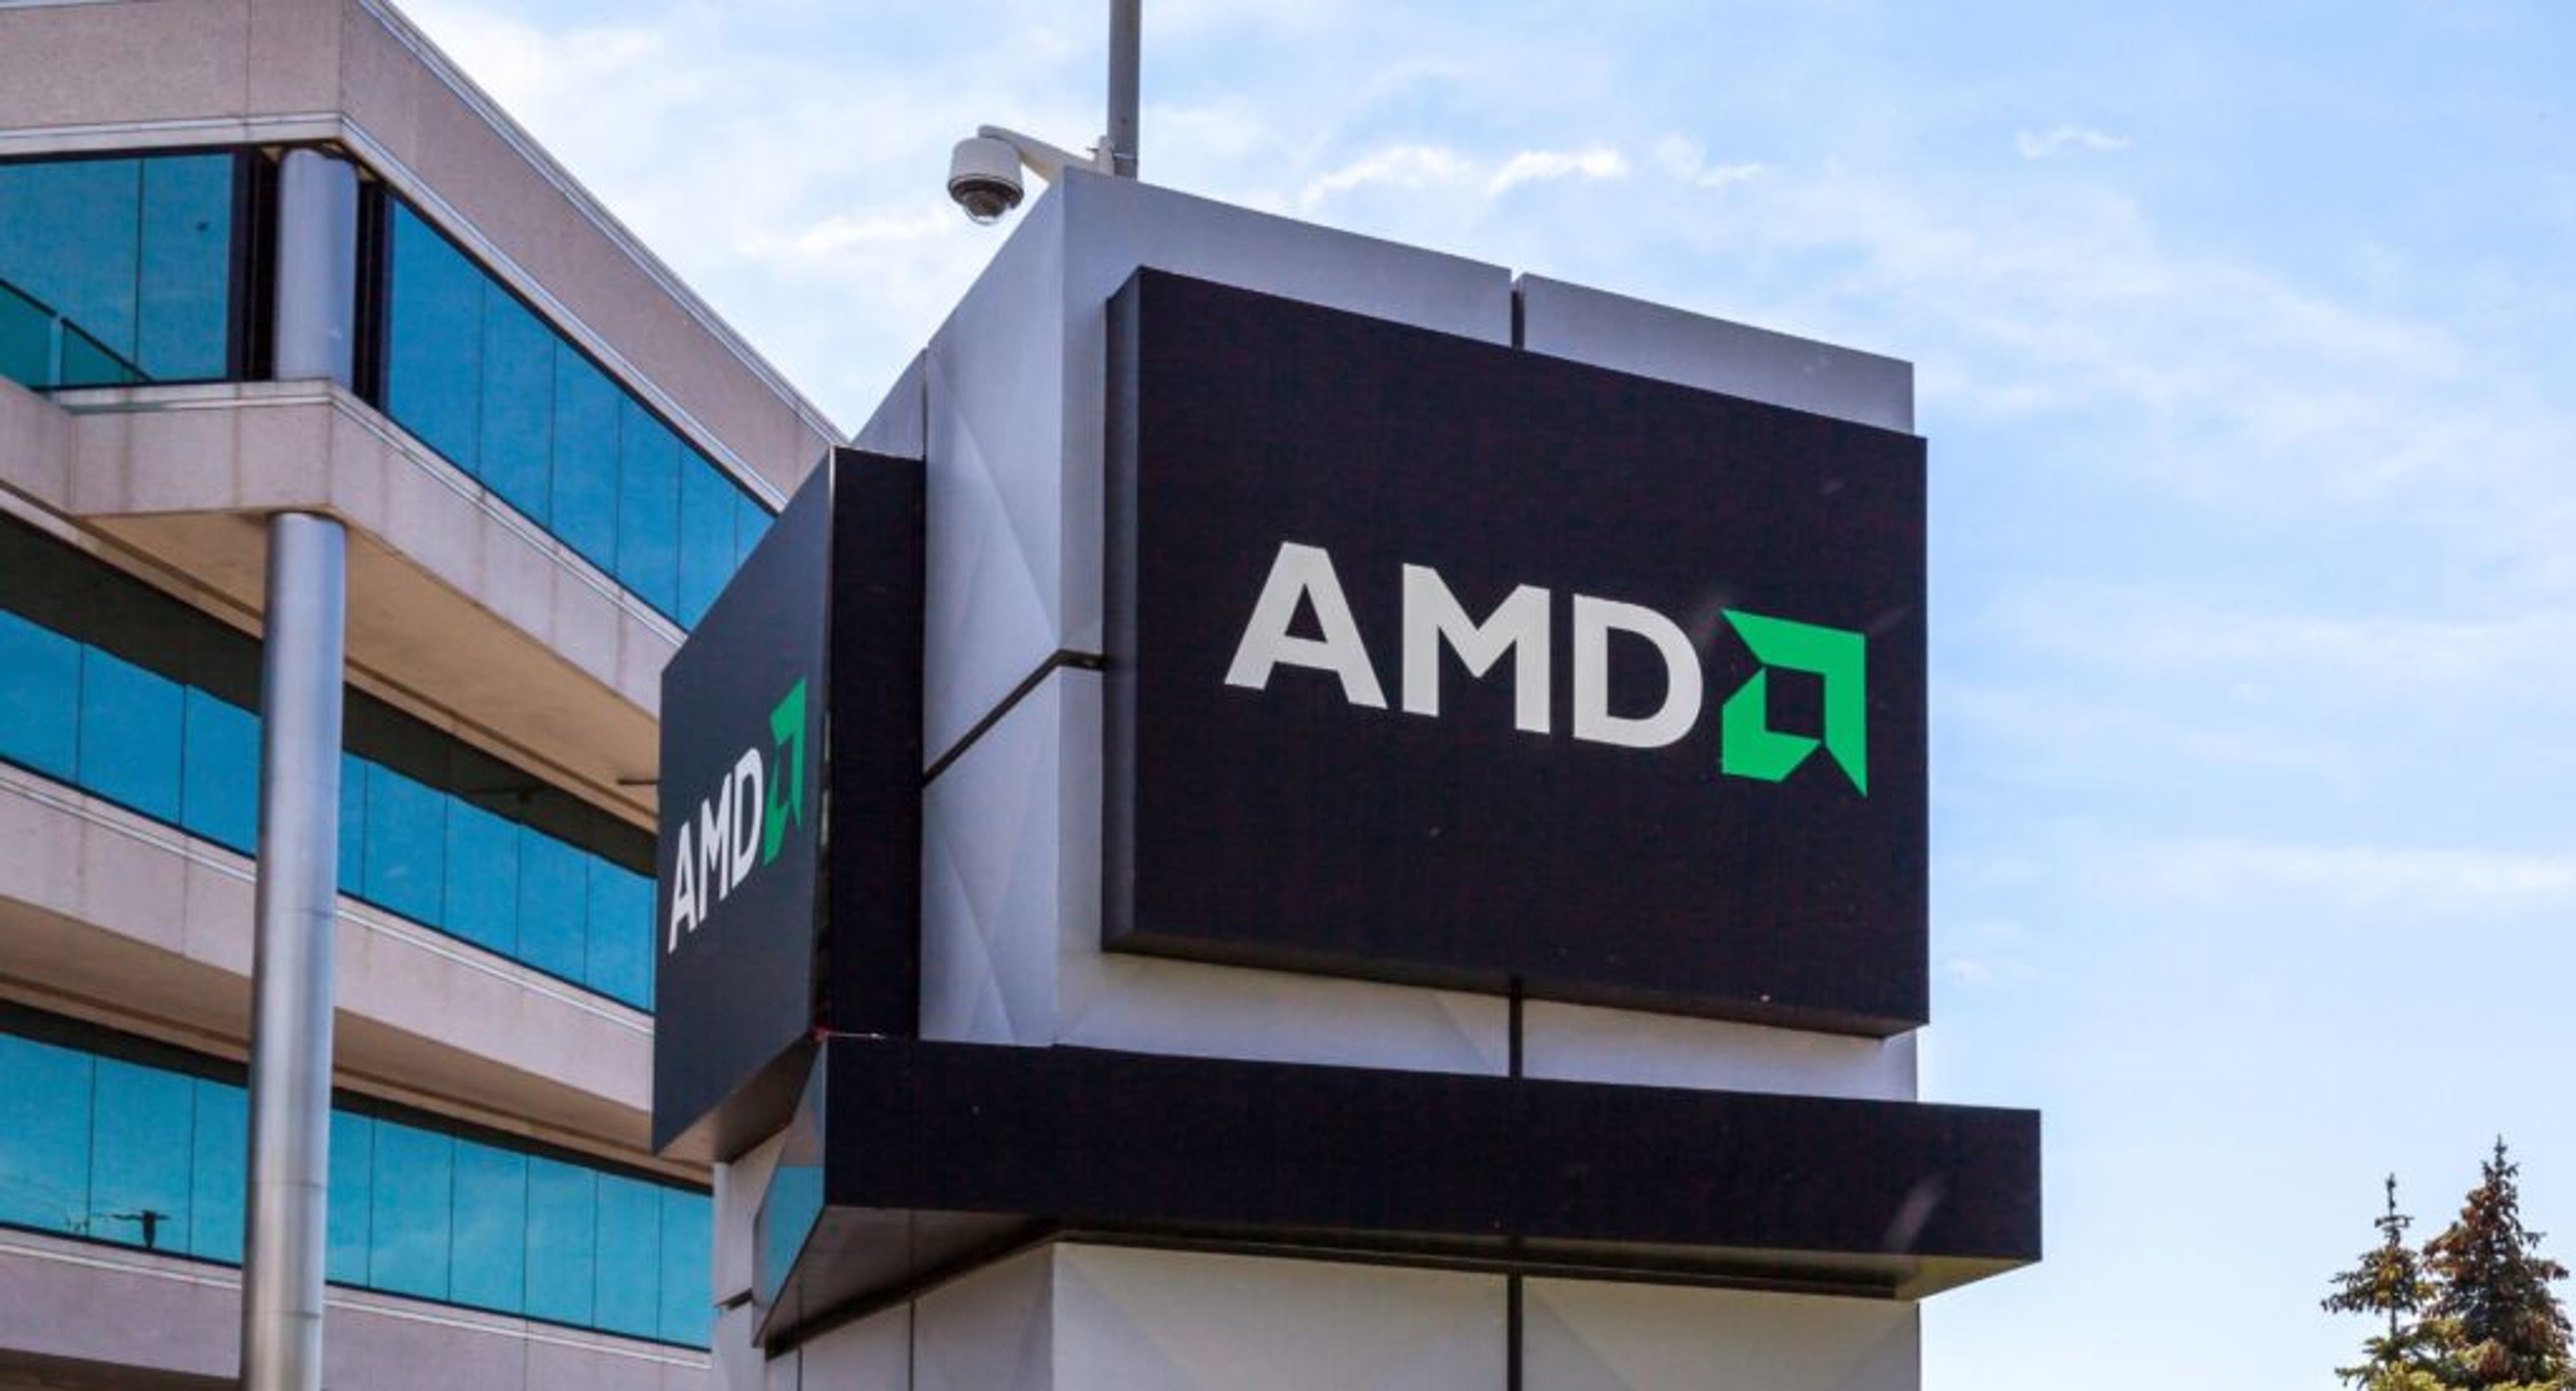 AMD Q1 Earnings Preview: Street Loses Sleep Over Q2 Outlook Amid Datacenter Challenges